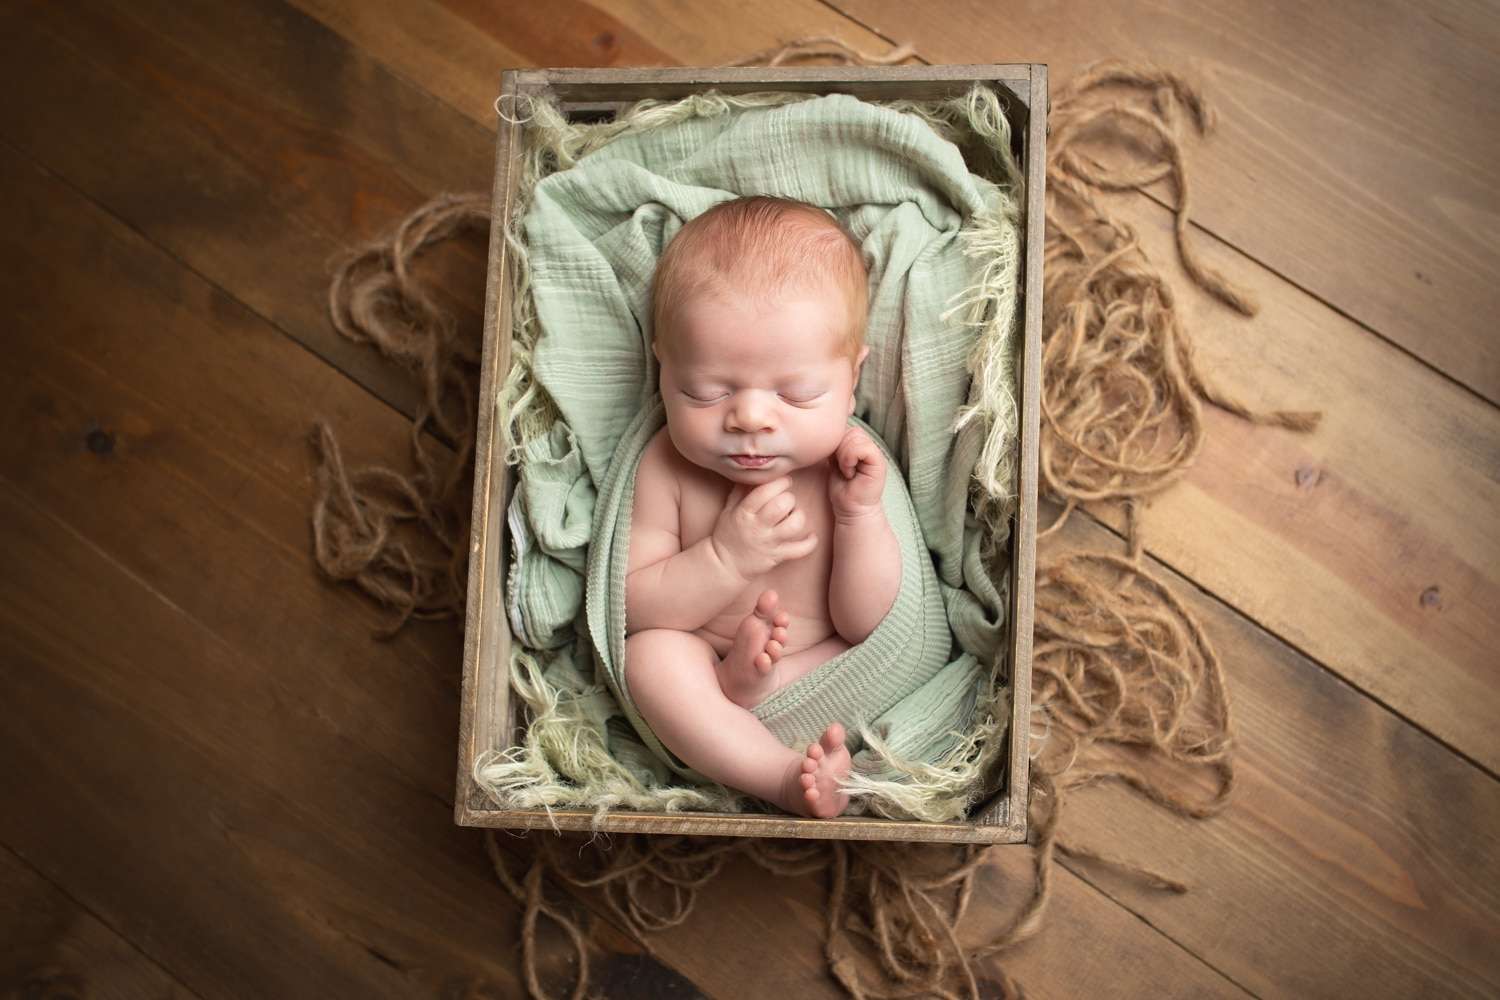 newborn photographer in rochester ny captures newborn baby boy sleeping in a crate